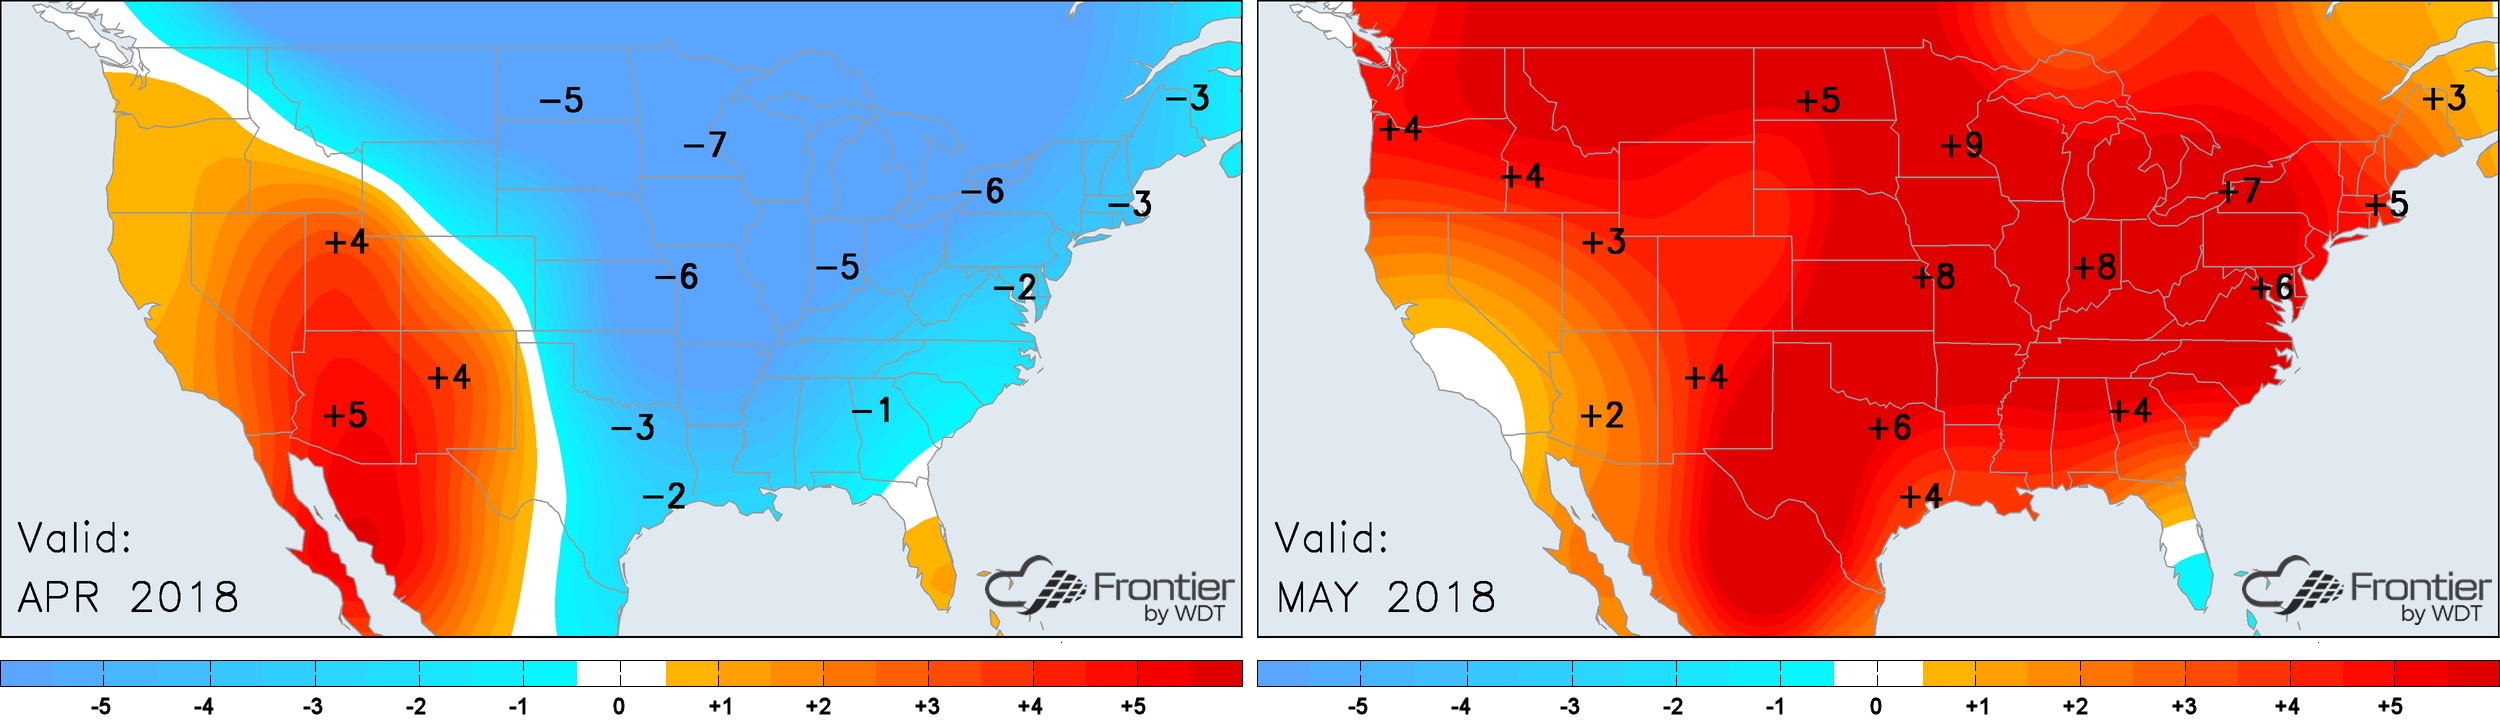 Temperature Anomalies for April and May